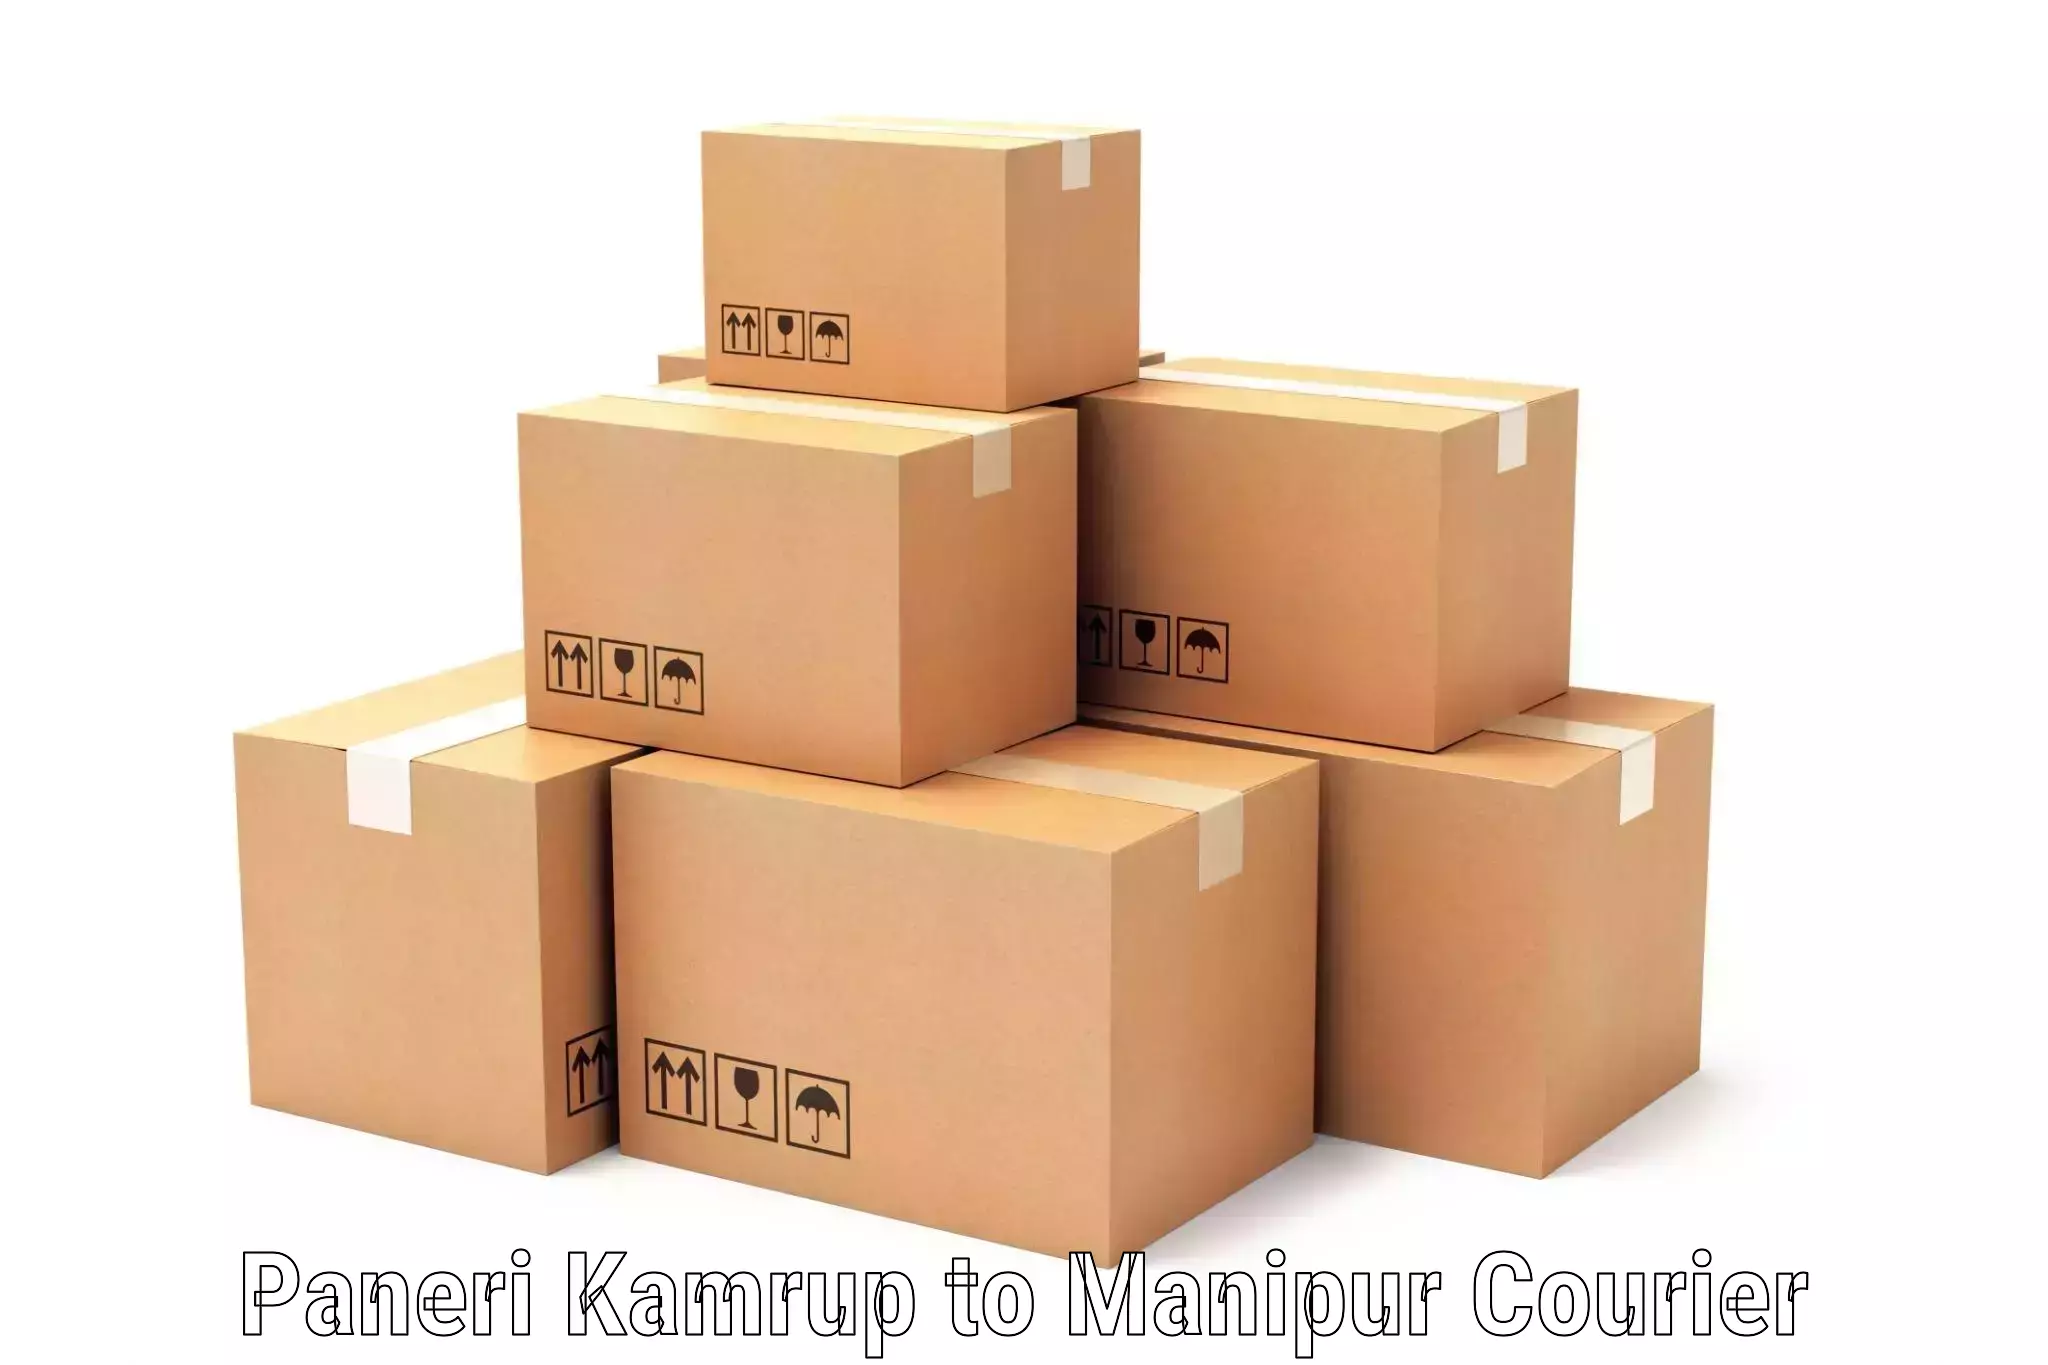 24-hour courier service Paneri Kamrup to Imphal